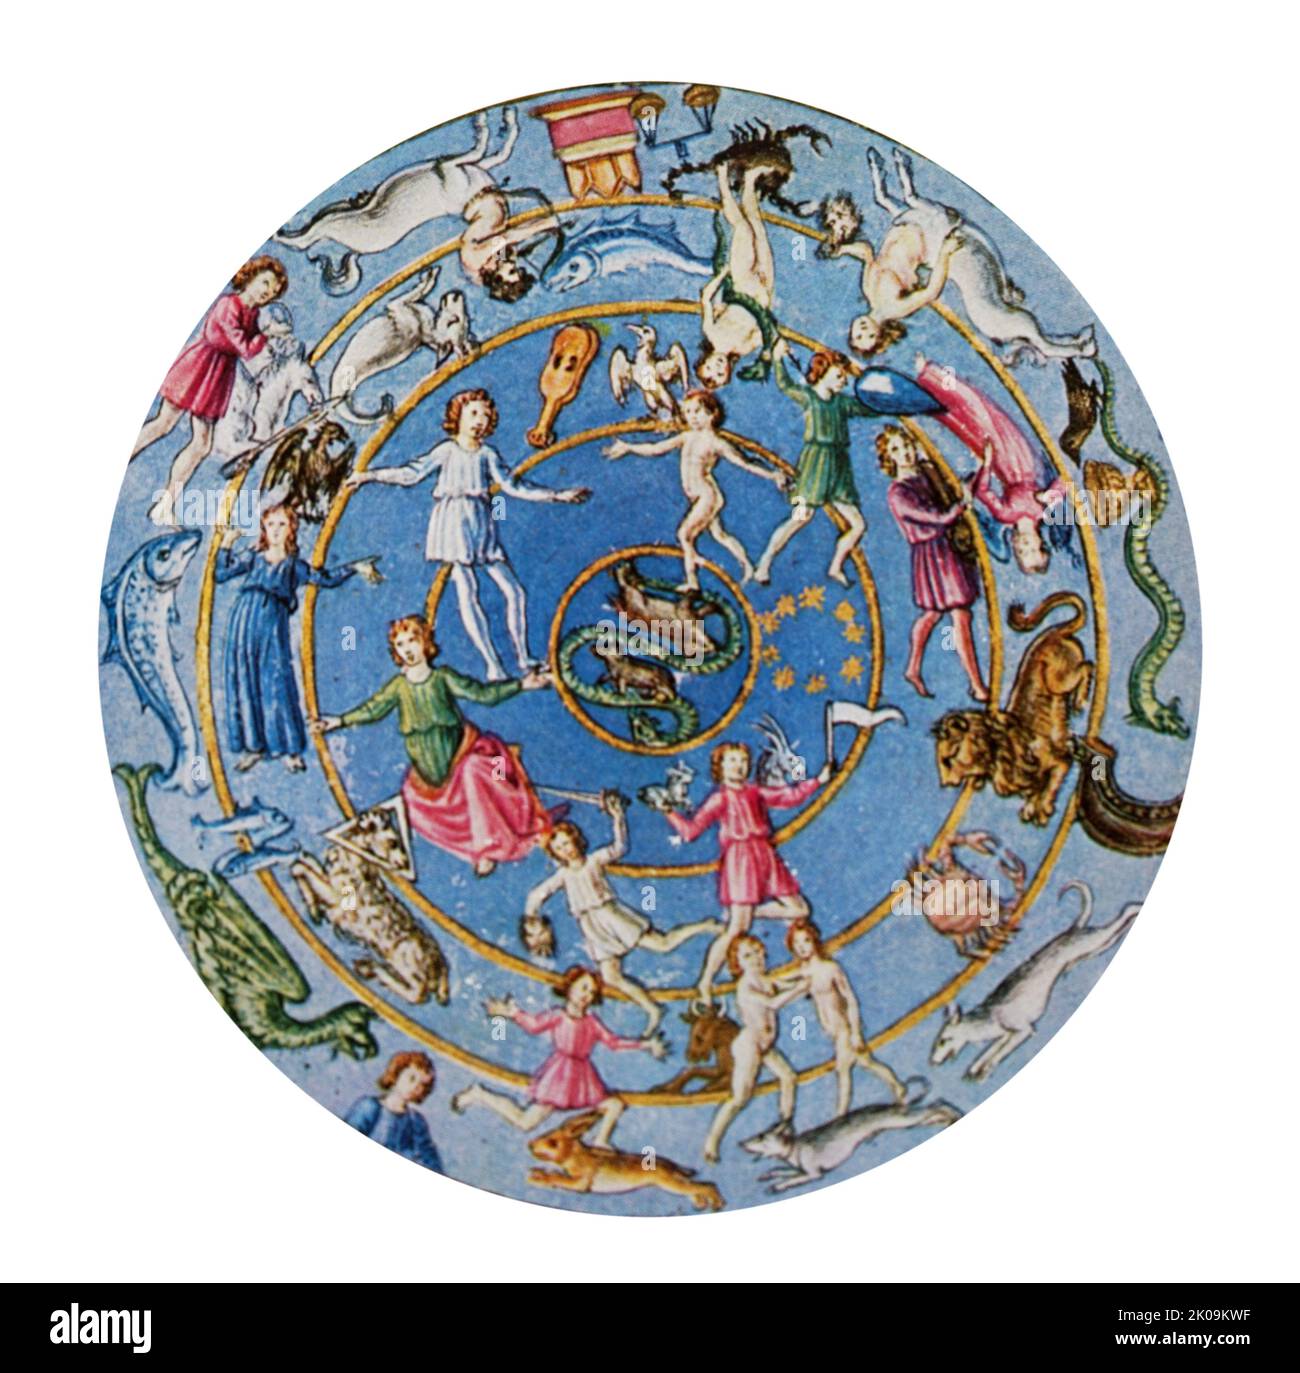 Florentine, 15th century: Figures of the Zodiac and astrological symbols, by Matteo Palmieri. Matteo di Marco Palmieri (1406-1475) was a Florentine humanist and historian. Stock Photo